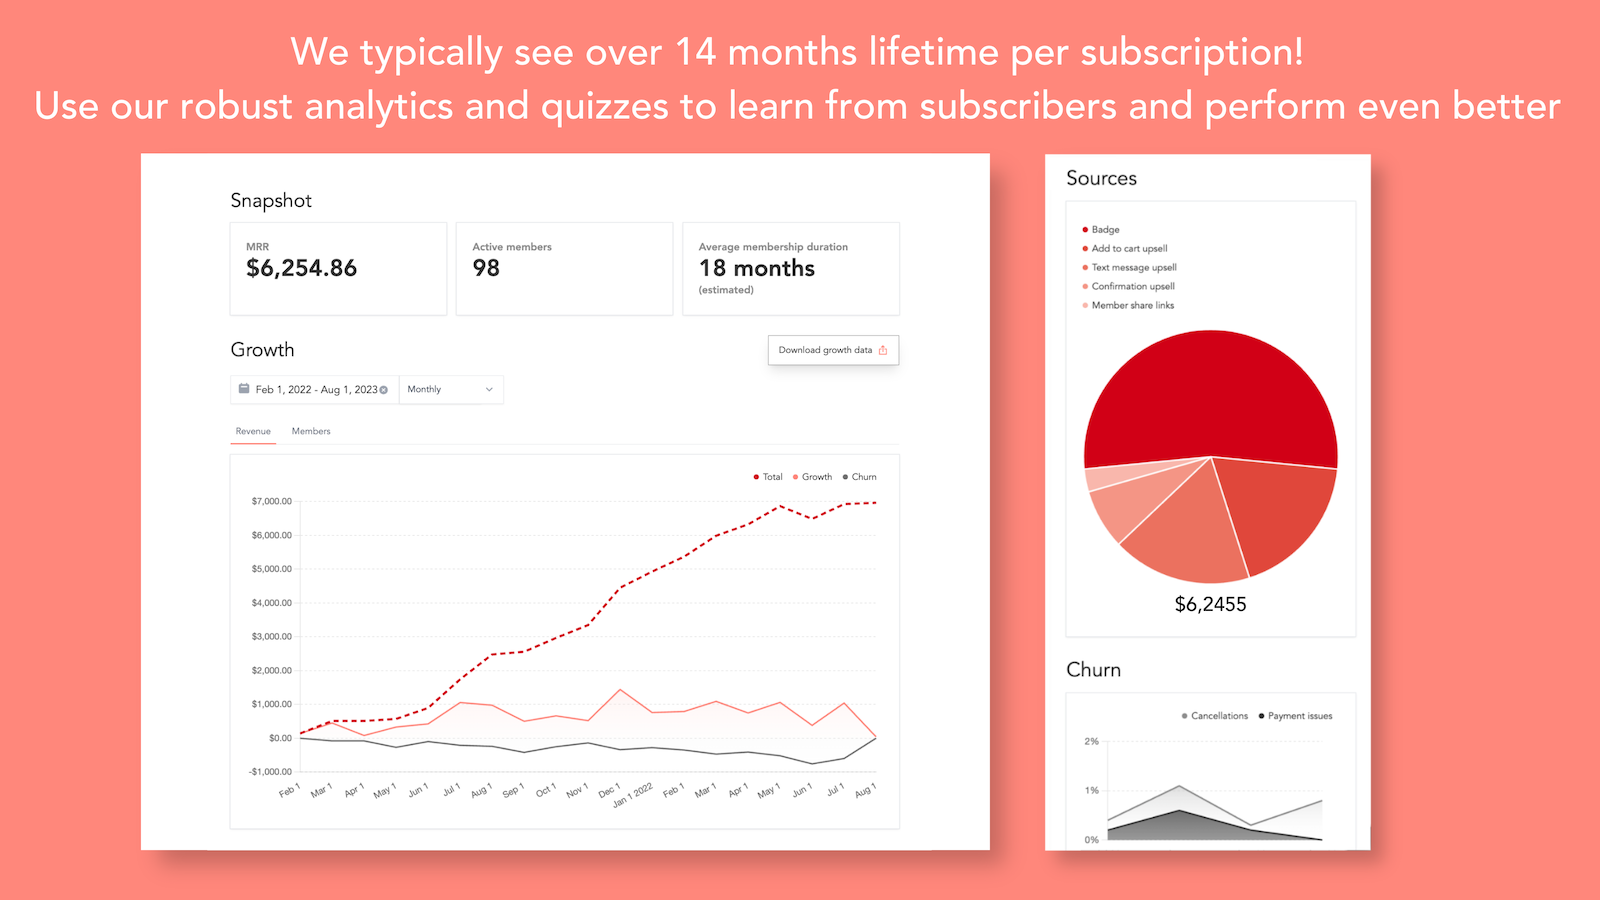 We typically see > 14 months lifetime per subscription